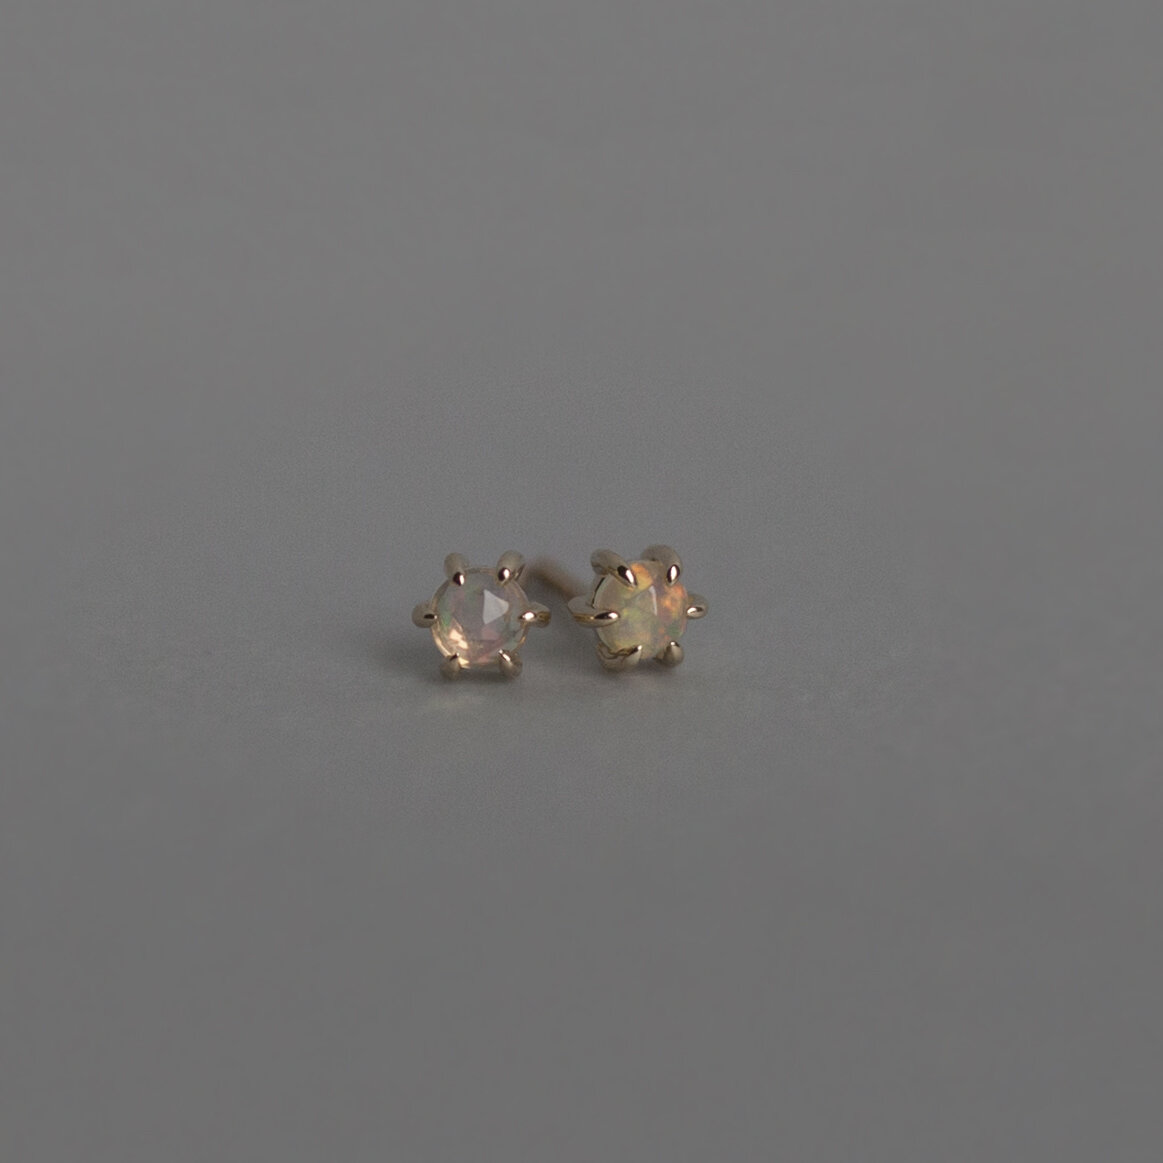 White Opal Earrings Small Studs Gold Filled Jewelry Handmade